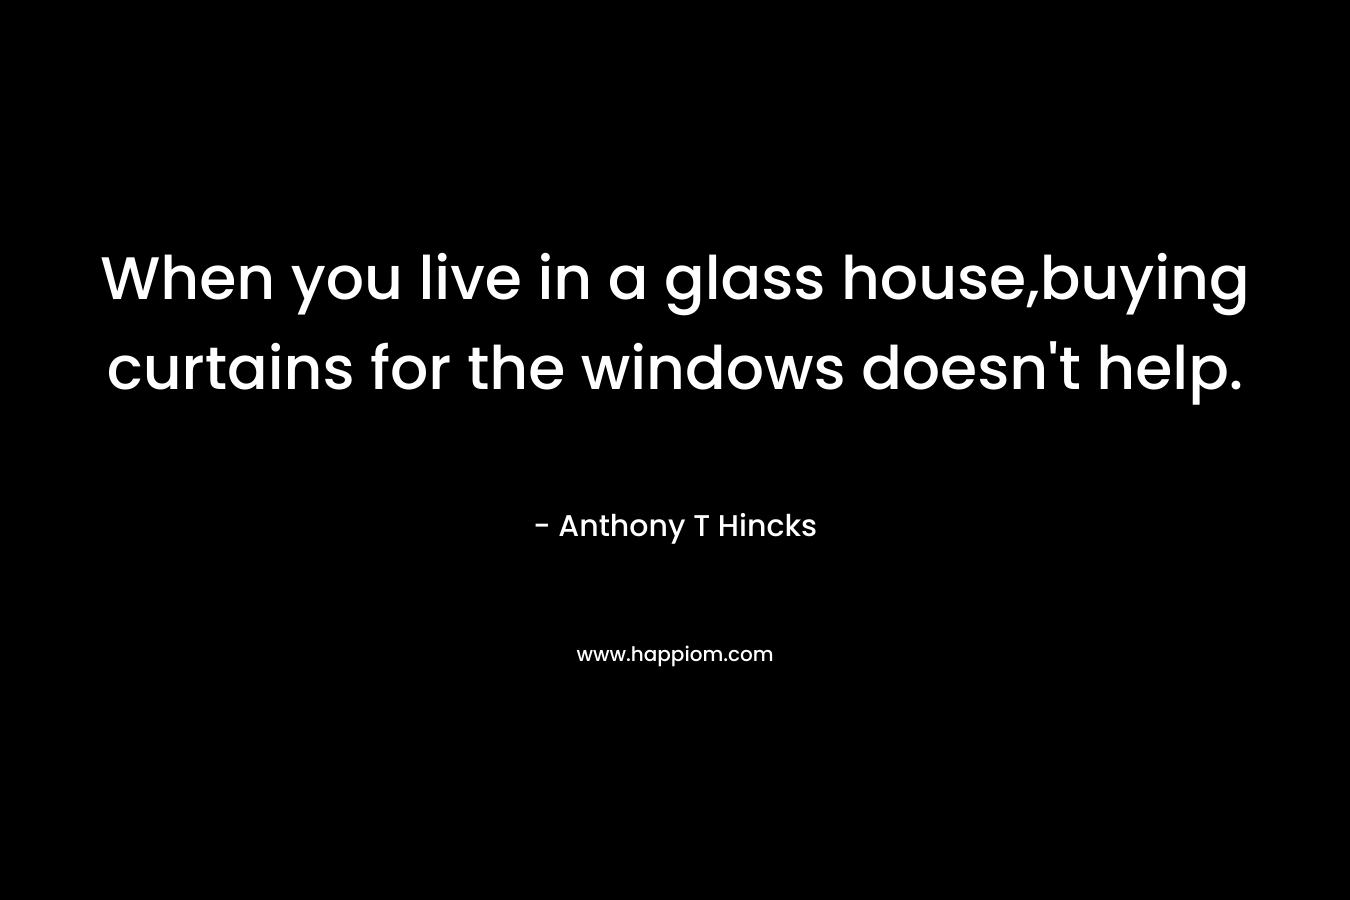 When you live in a glass house,buying curtains for the windows doesn’t help. – Anthony T Hincks